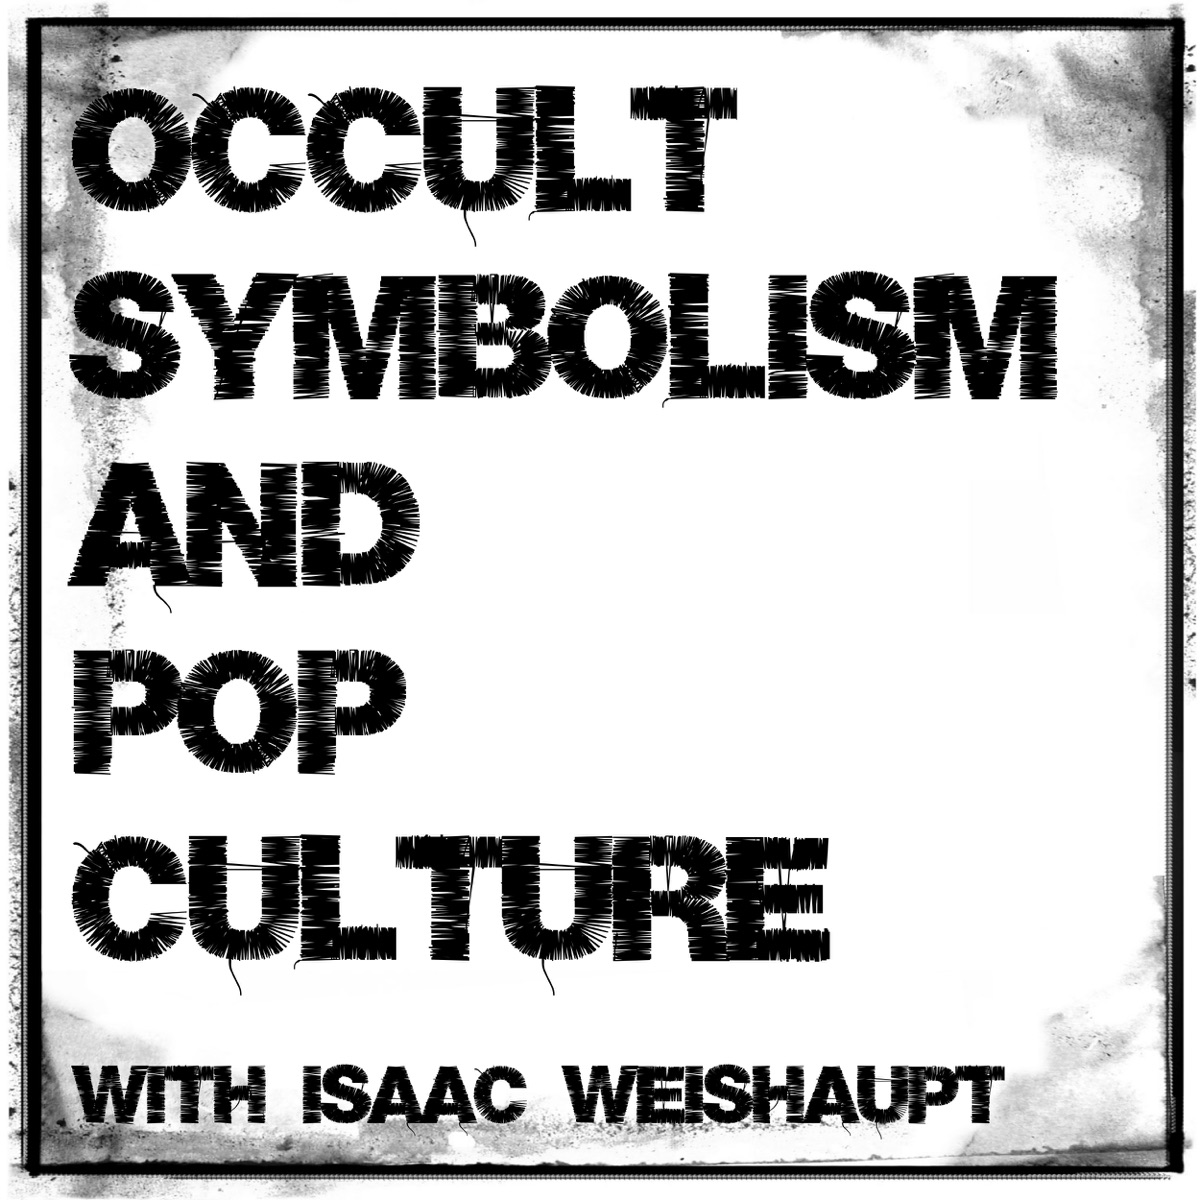 The Owl Club on Twitter  Owl house, Owl, Occult symbols